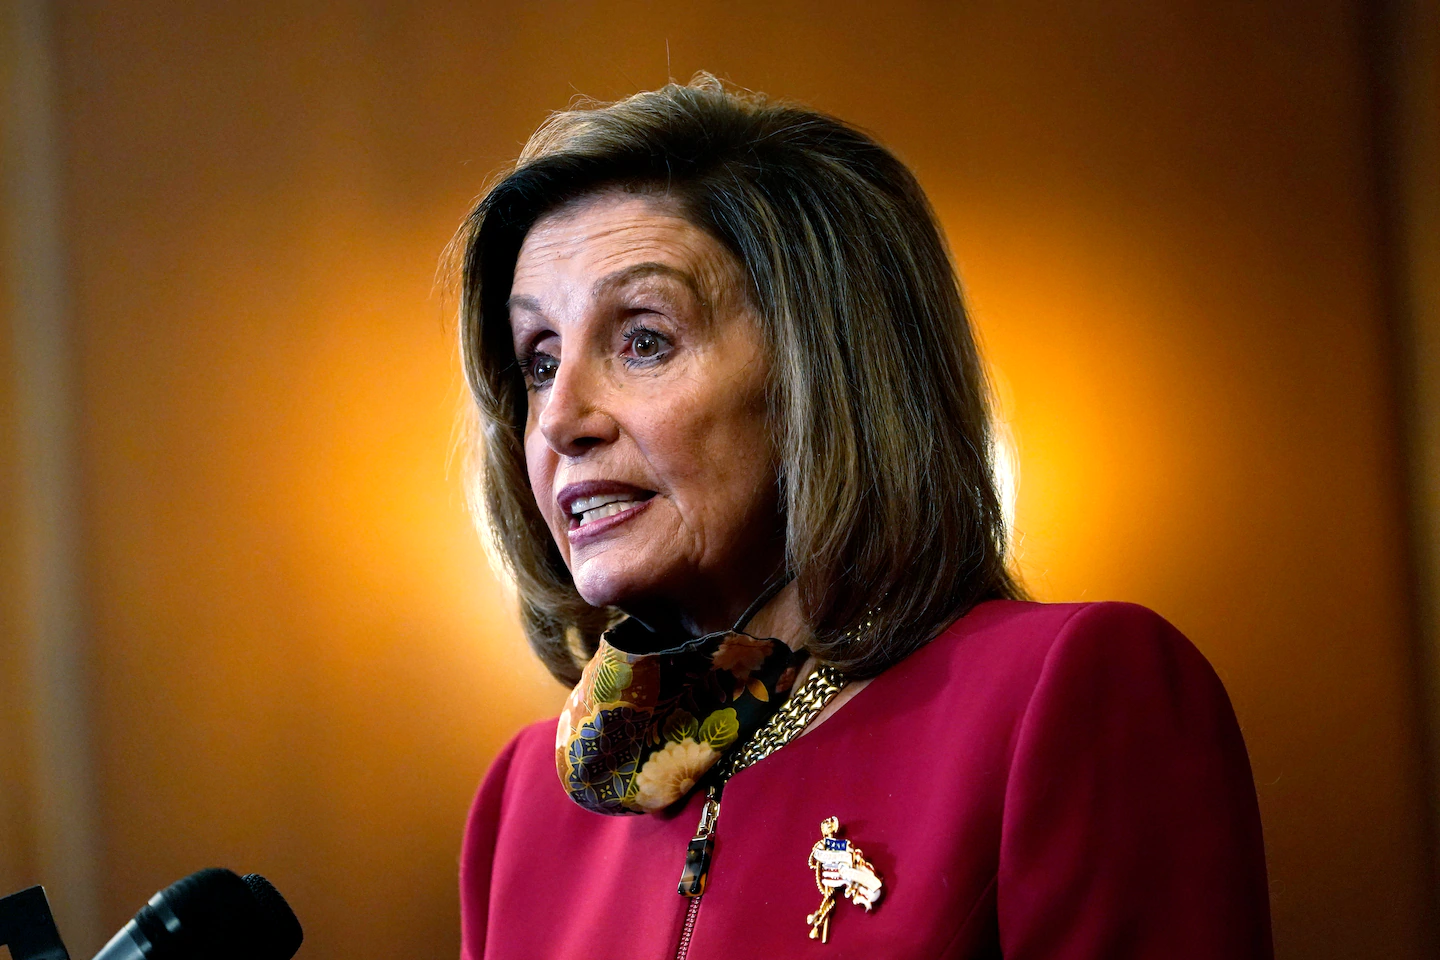 Trump moves closer to Pelosi in economic aid talks, and House speaker must decide next move